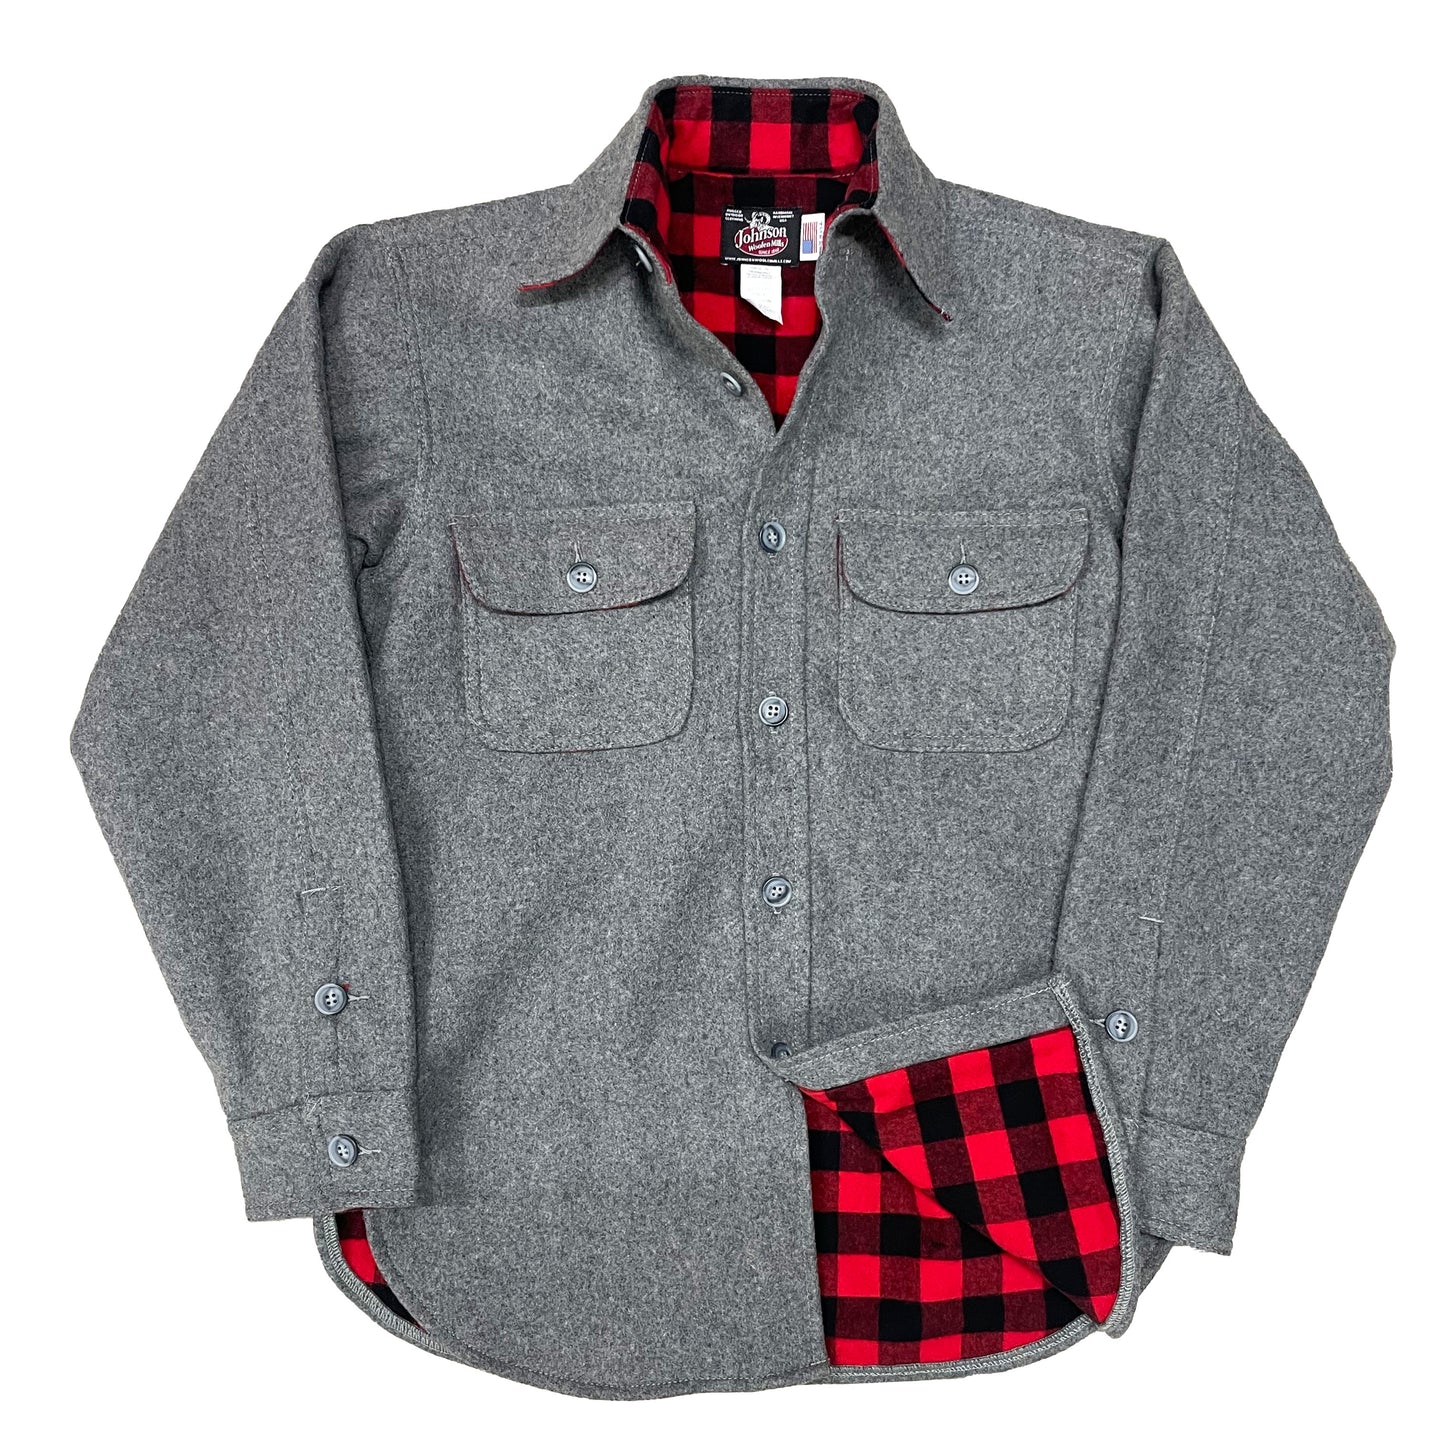 Long Tail Button Down long sleeve shirt with a 6 button front, button cuffs and two front chest pockets. Shown in gray with red, and black buffalo check flannel lining.